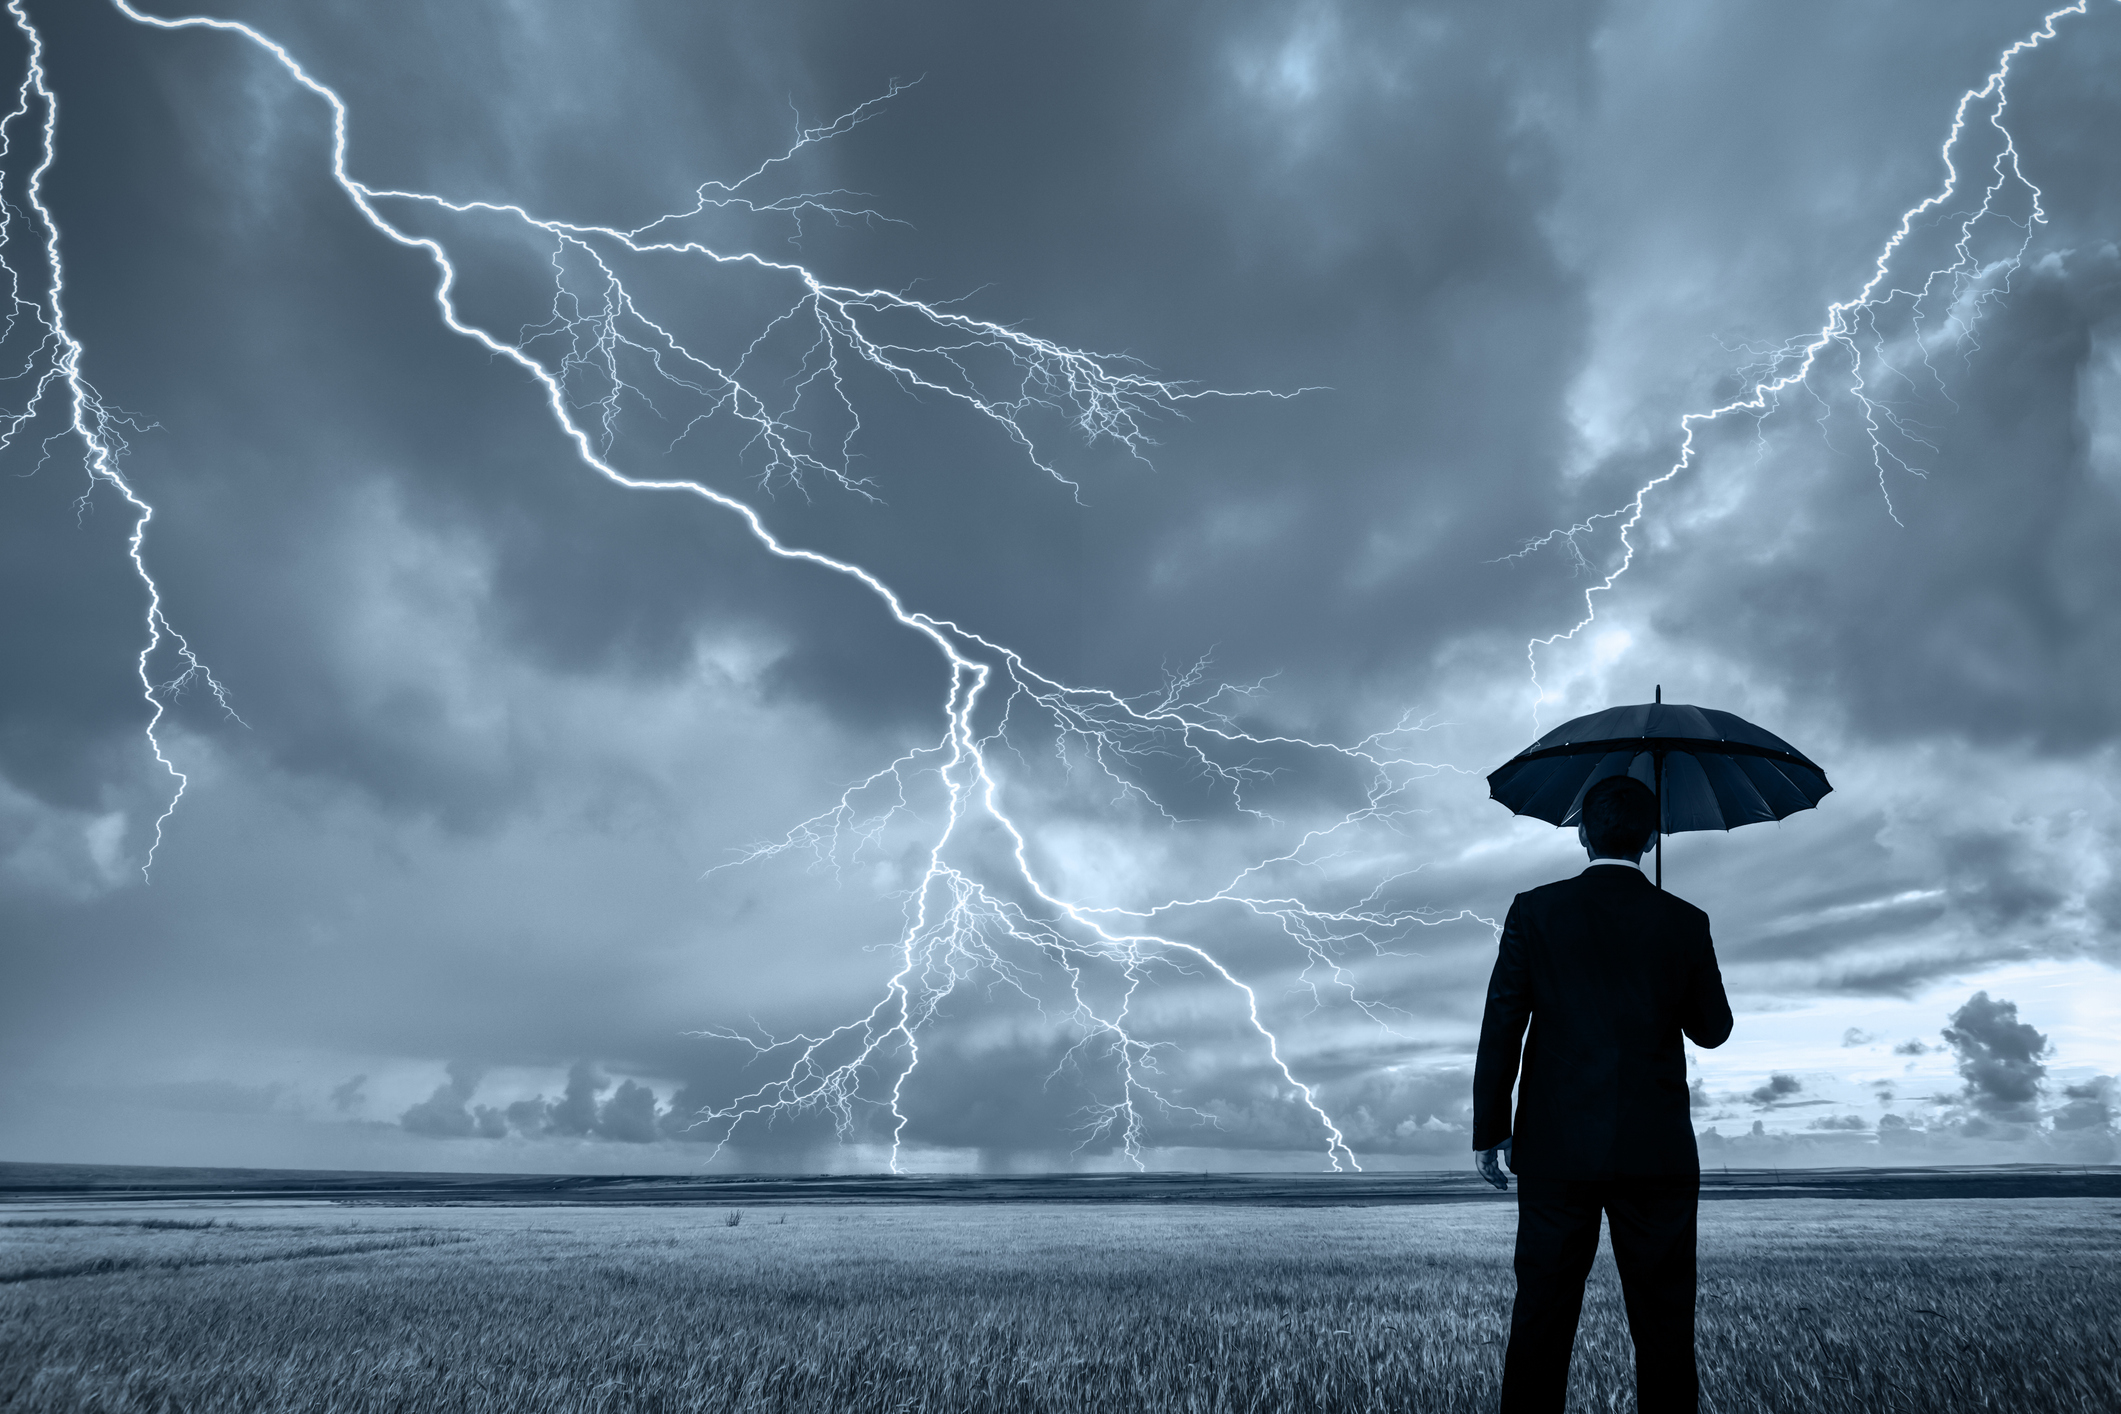 A rear view of a businessman in a suit, with an upheld umbrella, standing in a large field during a thunderstorm. Lightning is seen descending from a gray and cloudy sky.